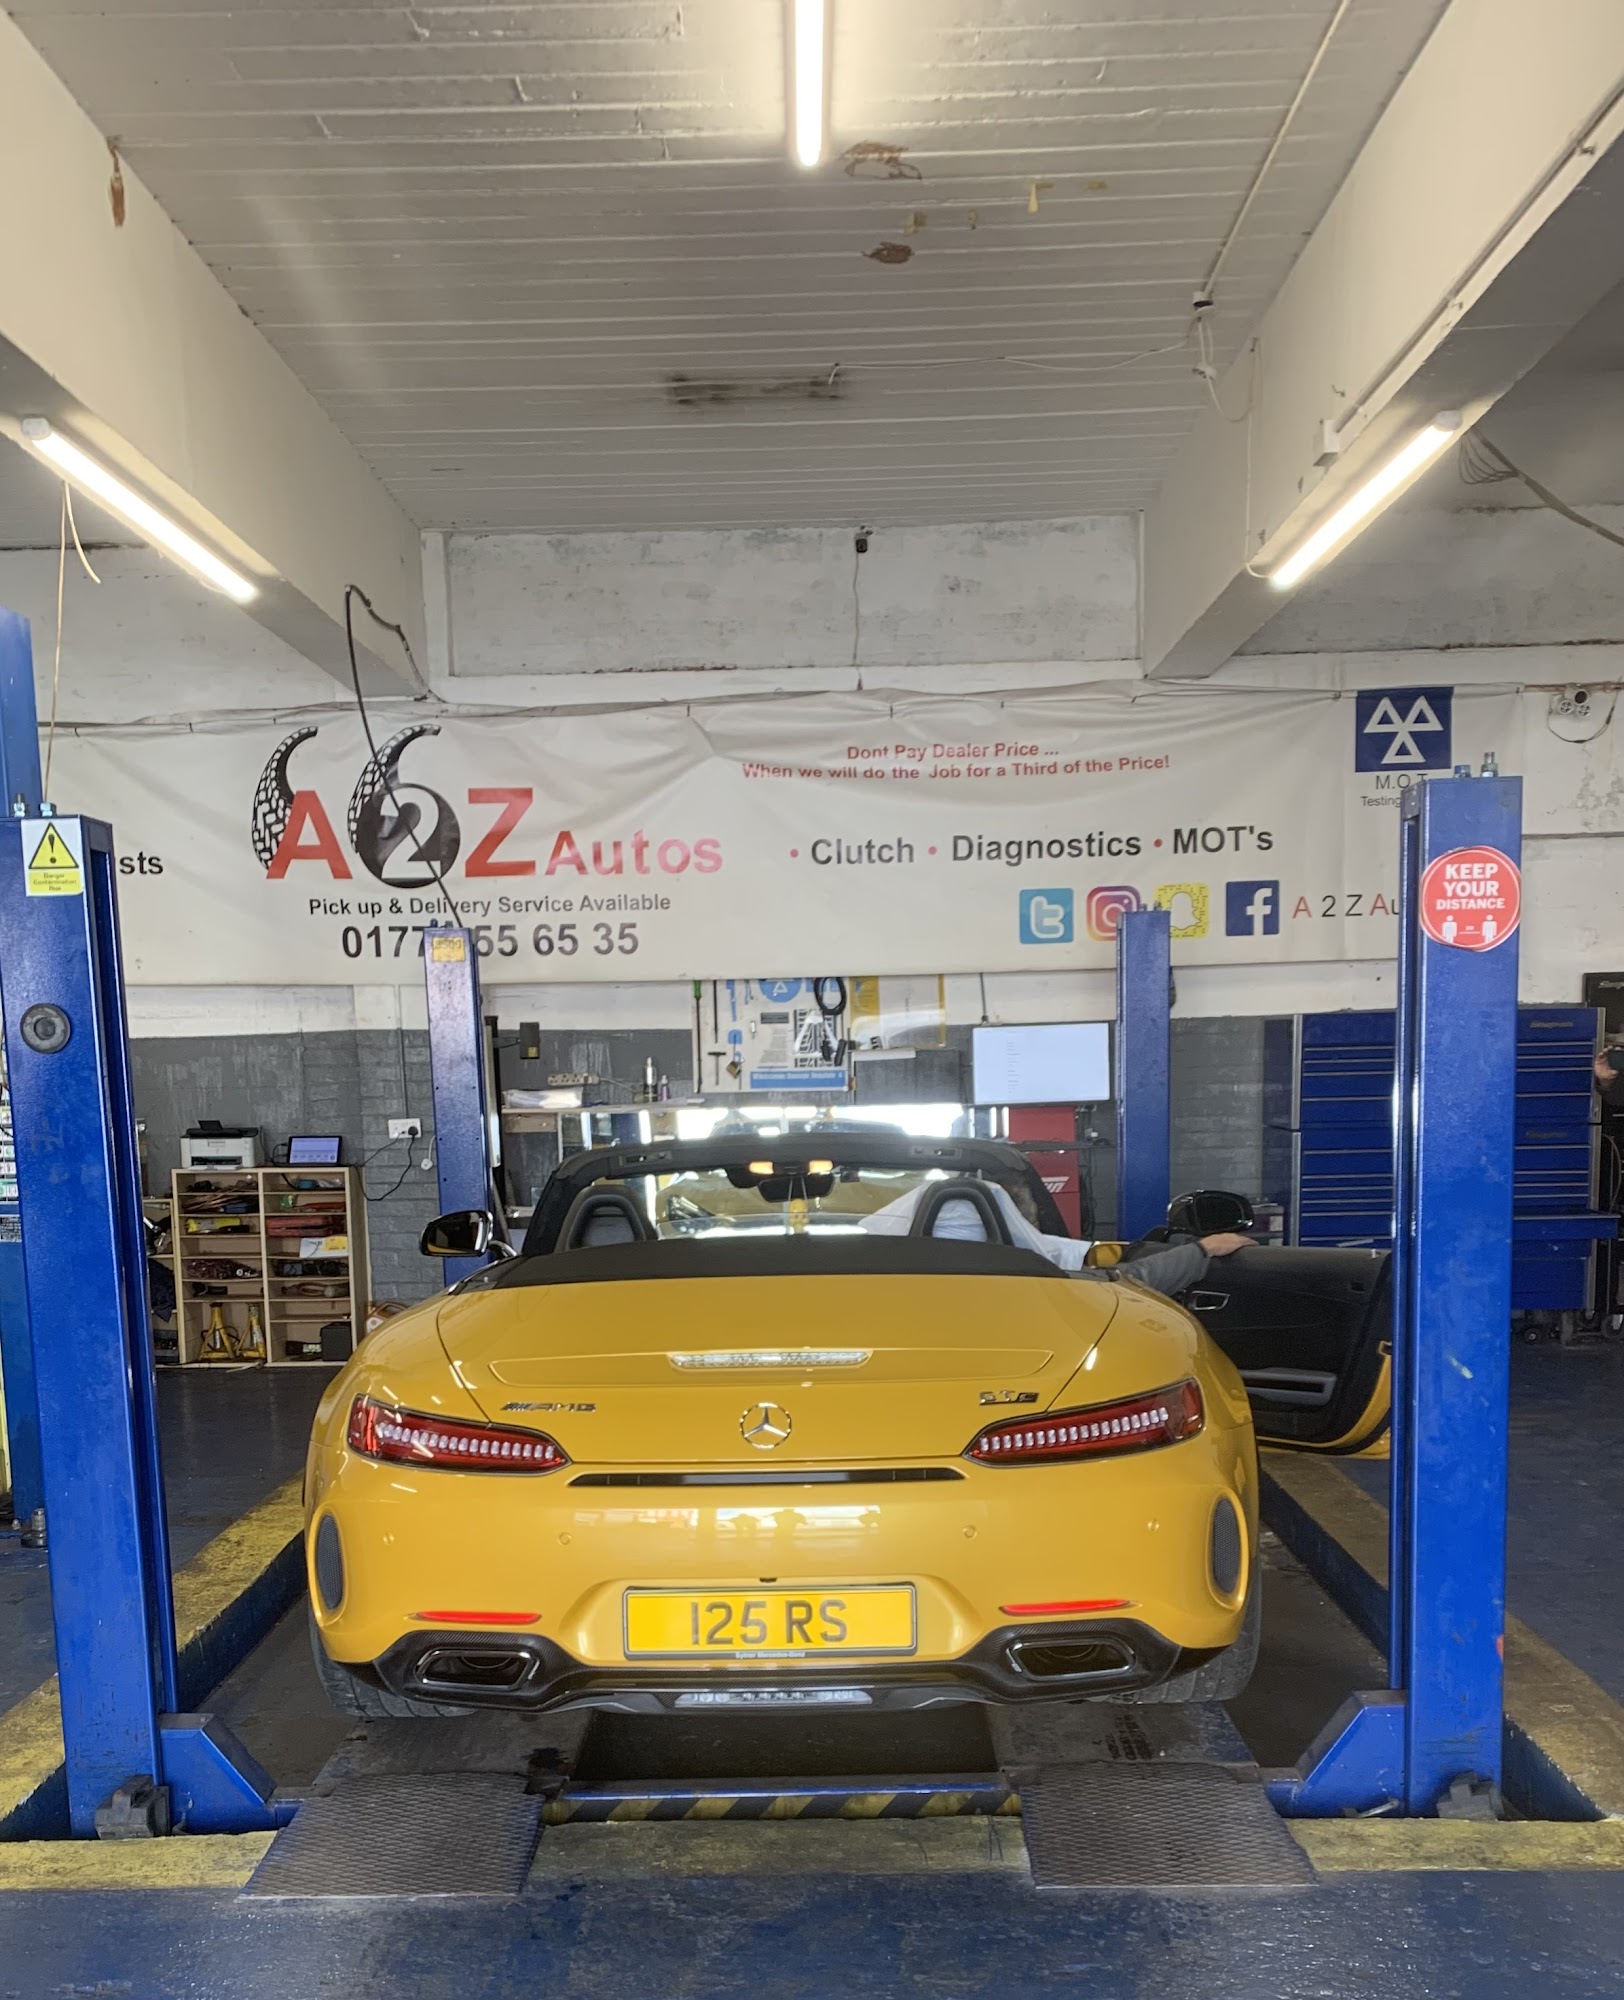 A2Z MOT GARAGE(Tyres| Inspection|Brakes|Timing| Turbos|Diagnostic|Exhaust|Suspension|Clutch|Service|Repairs|Oil Change